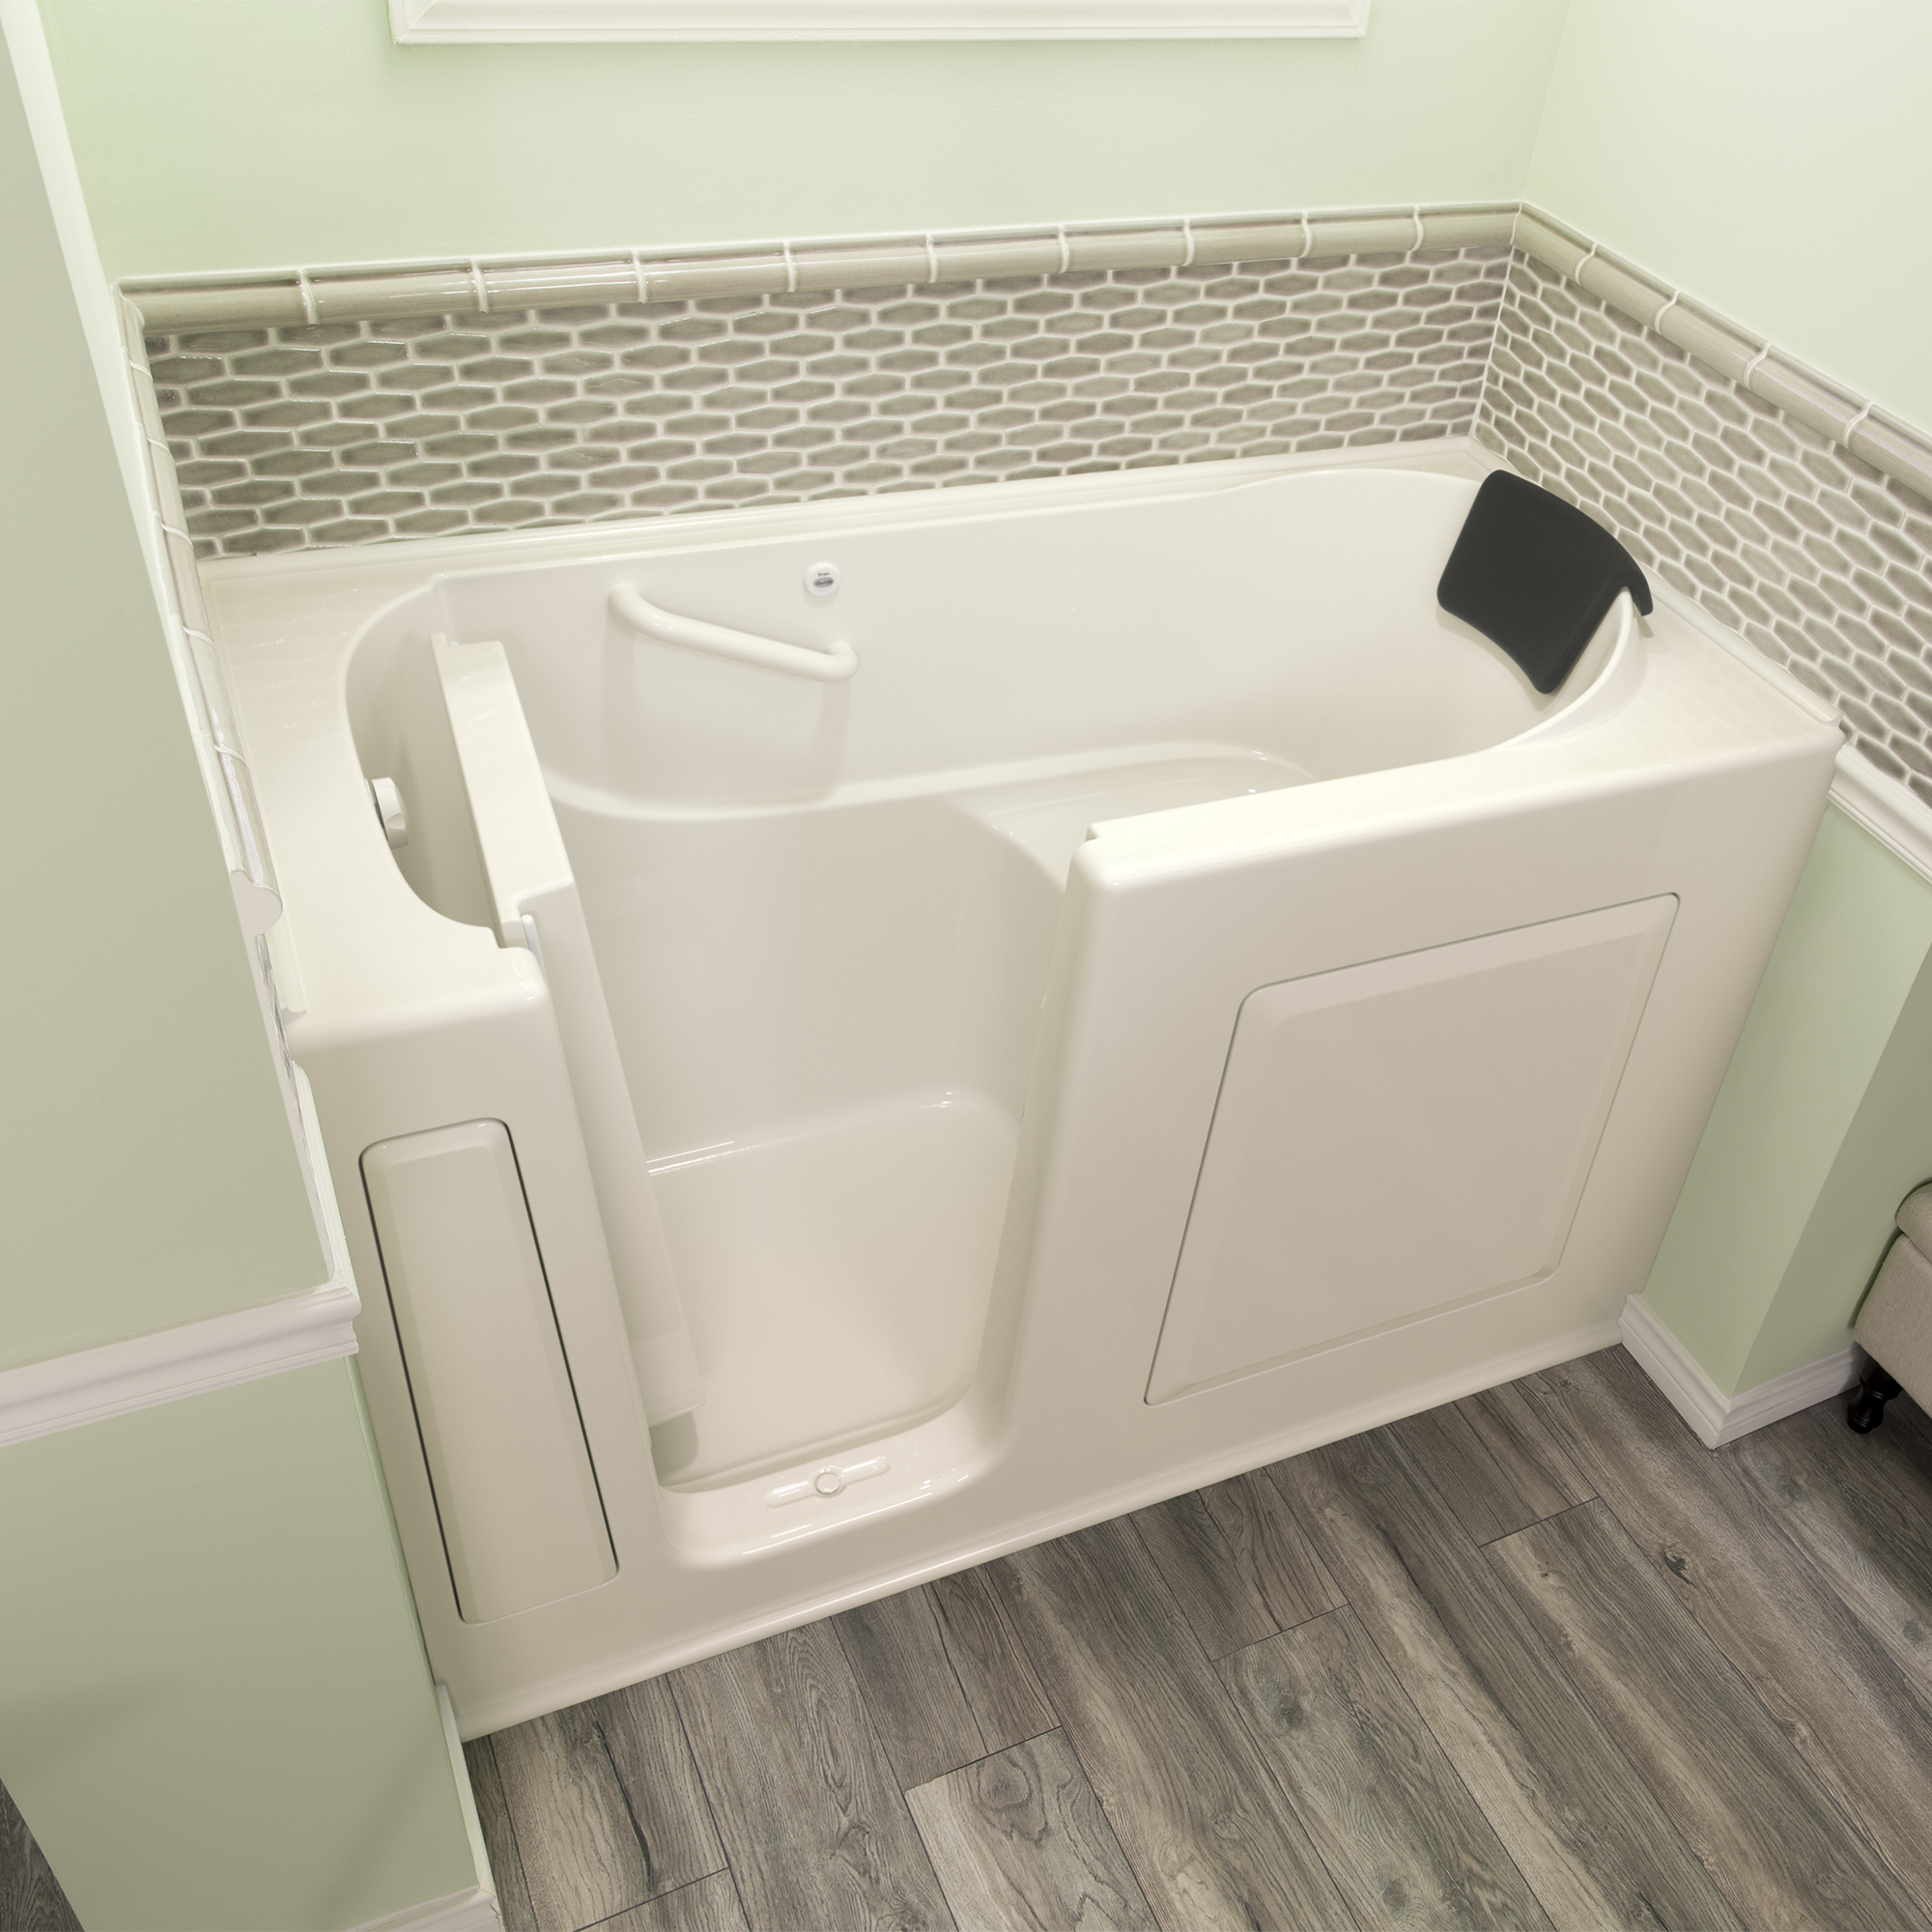 Gelcoat Premium Series 30 x 60 -Inch Walk-in Tub With Soaker System - Left-Hand Drain